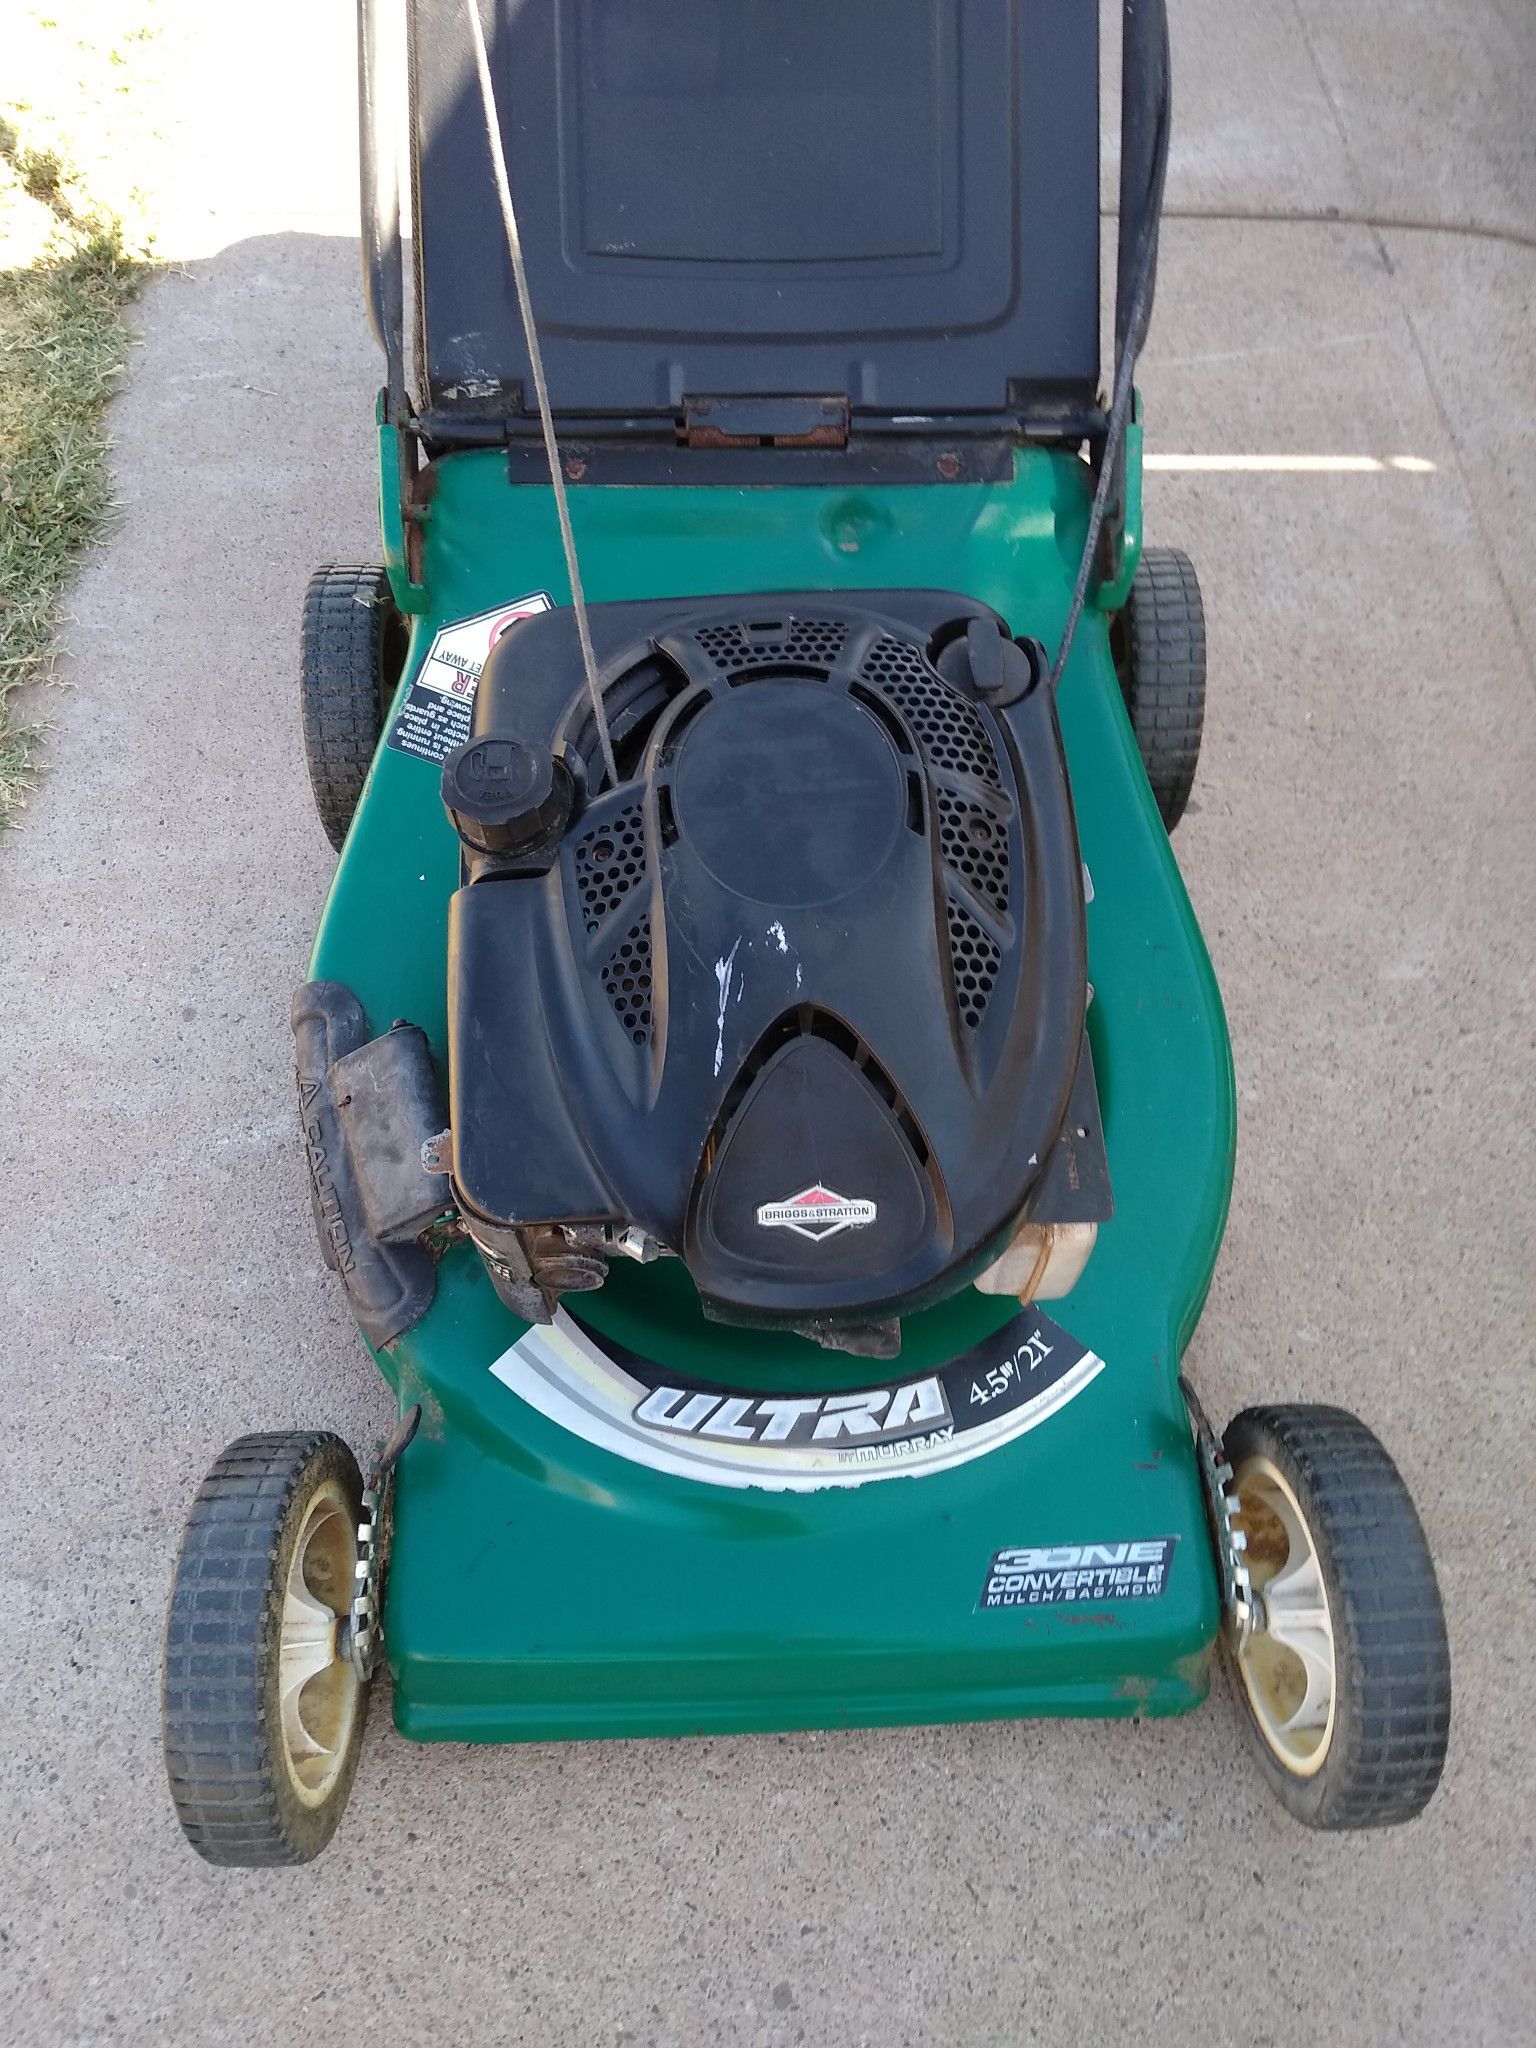 Gas lawn mower ultra Murray three-in-one 4.5 HP works good new blade torn bag